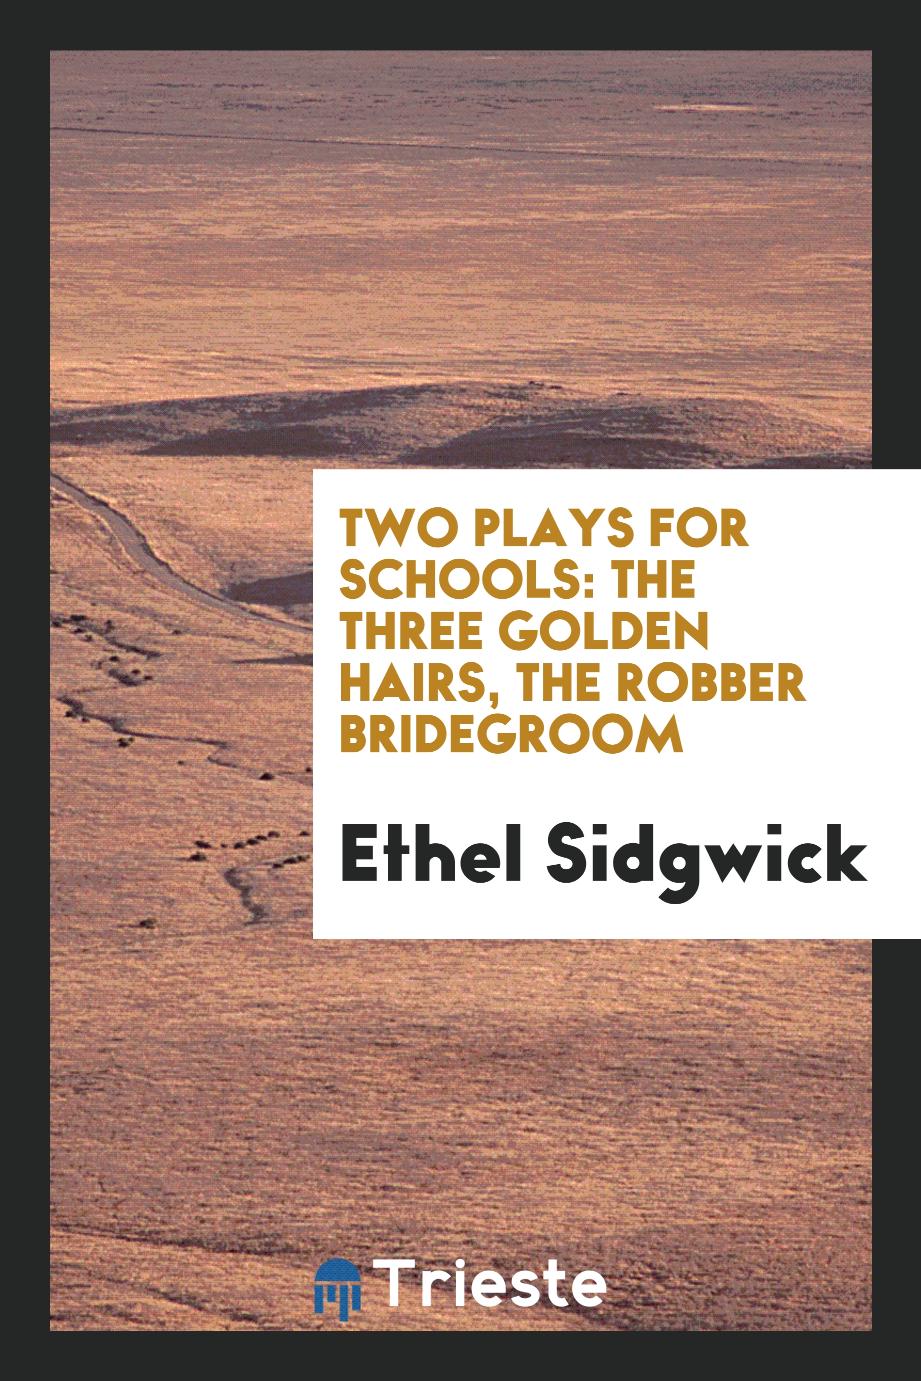 Two plays for schools: The three golden hairs, The robber bridegroom